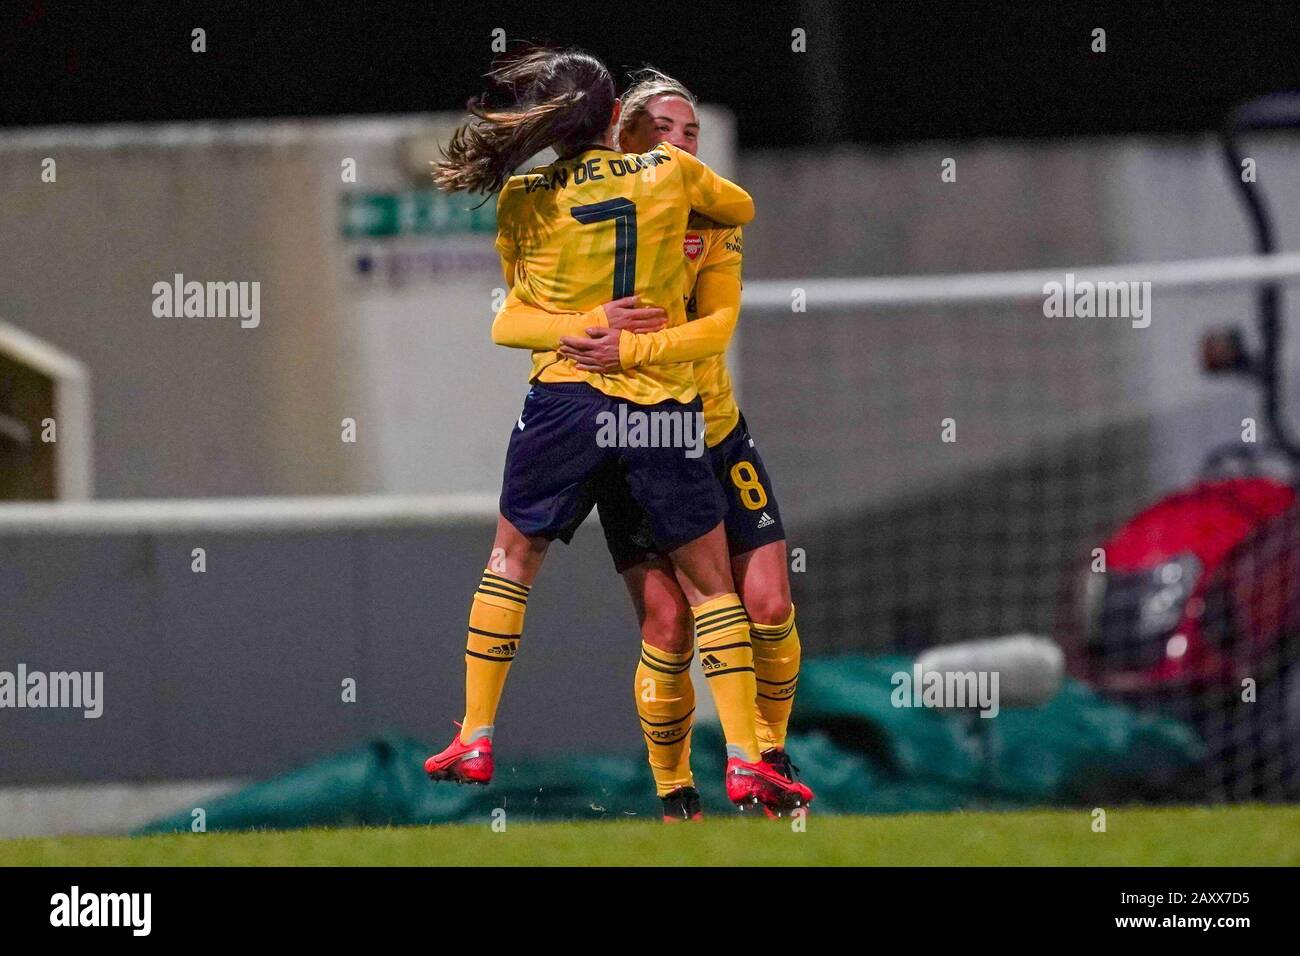 CHESTER. ENGLAND. FEB 13th: Jordan Nobbs of Arsenal celebrates her goal with Danielle Van De during the Women’s Super League game between Liverpool Women and Arsenal Women at The Deva Stadium in Chester, England. (Photo by Daniela Porcelli/SPP) Stock Photo